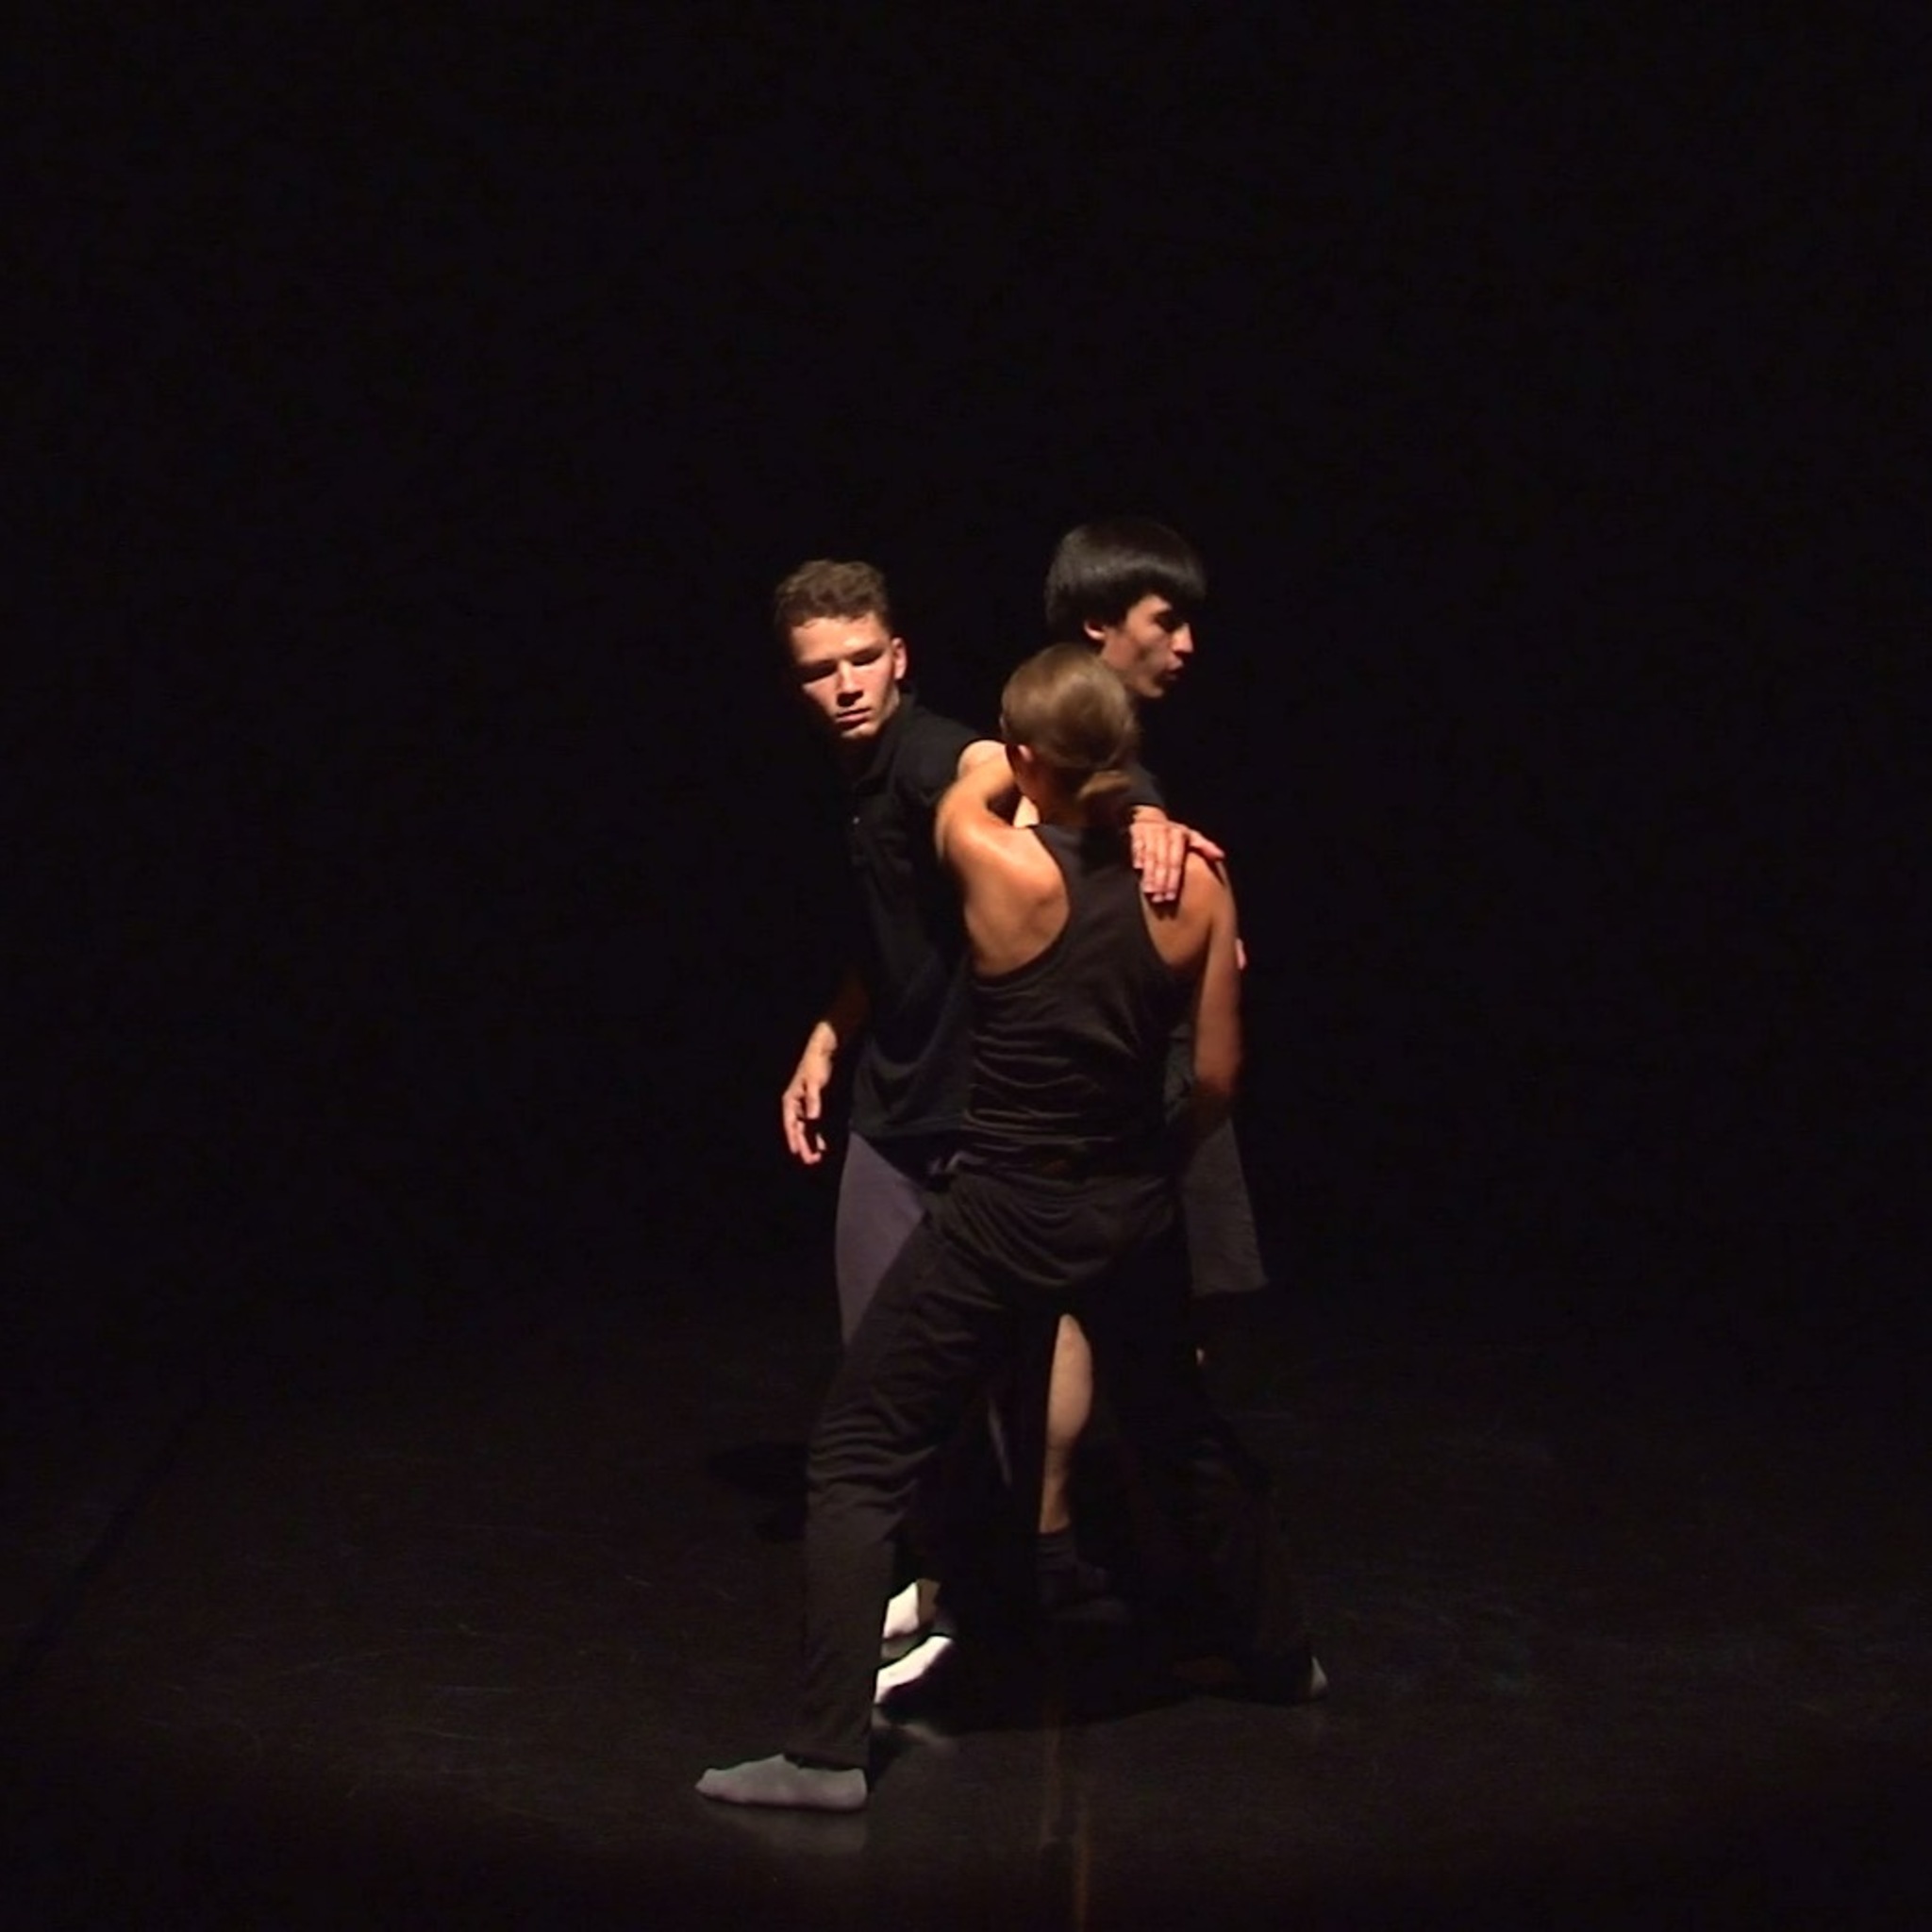 Showing and discussion of choreographic work Absence